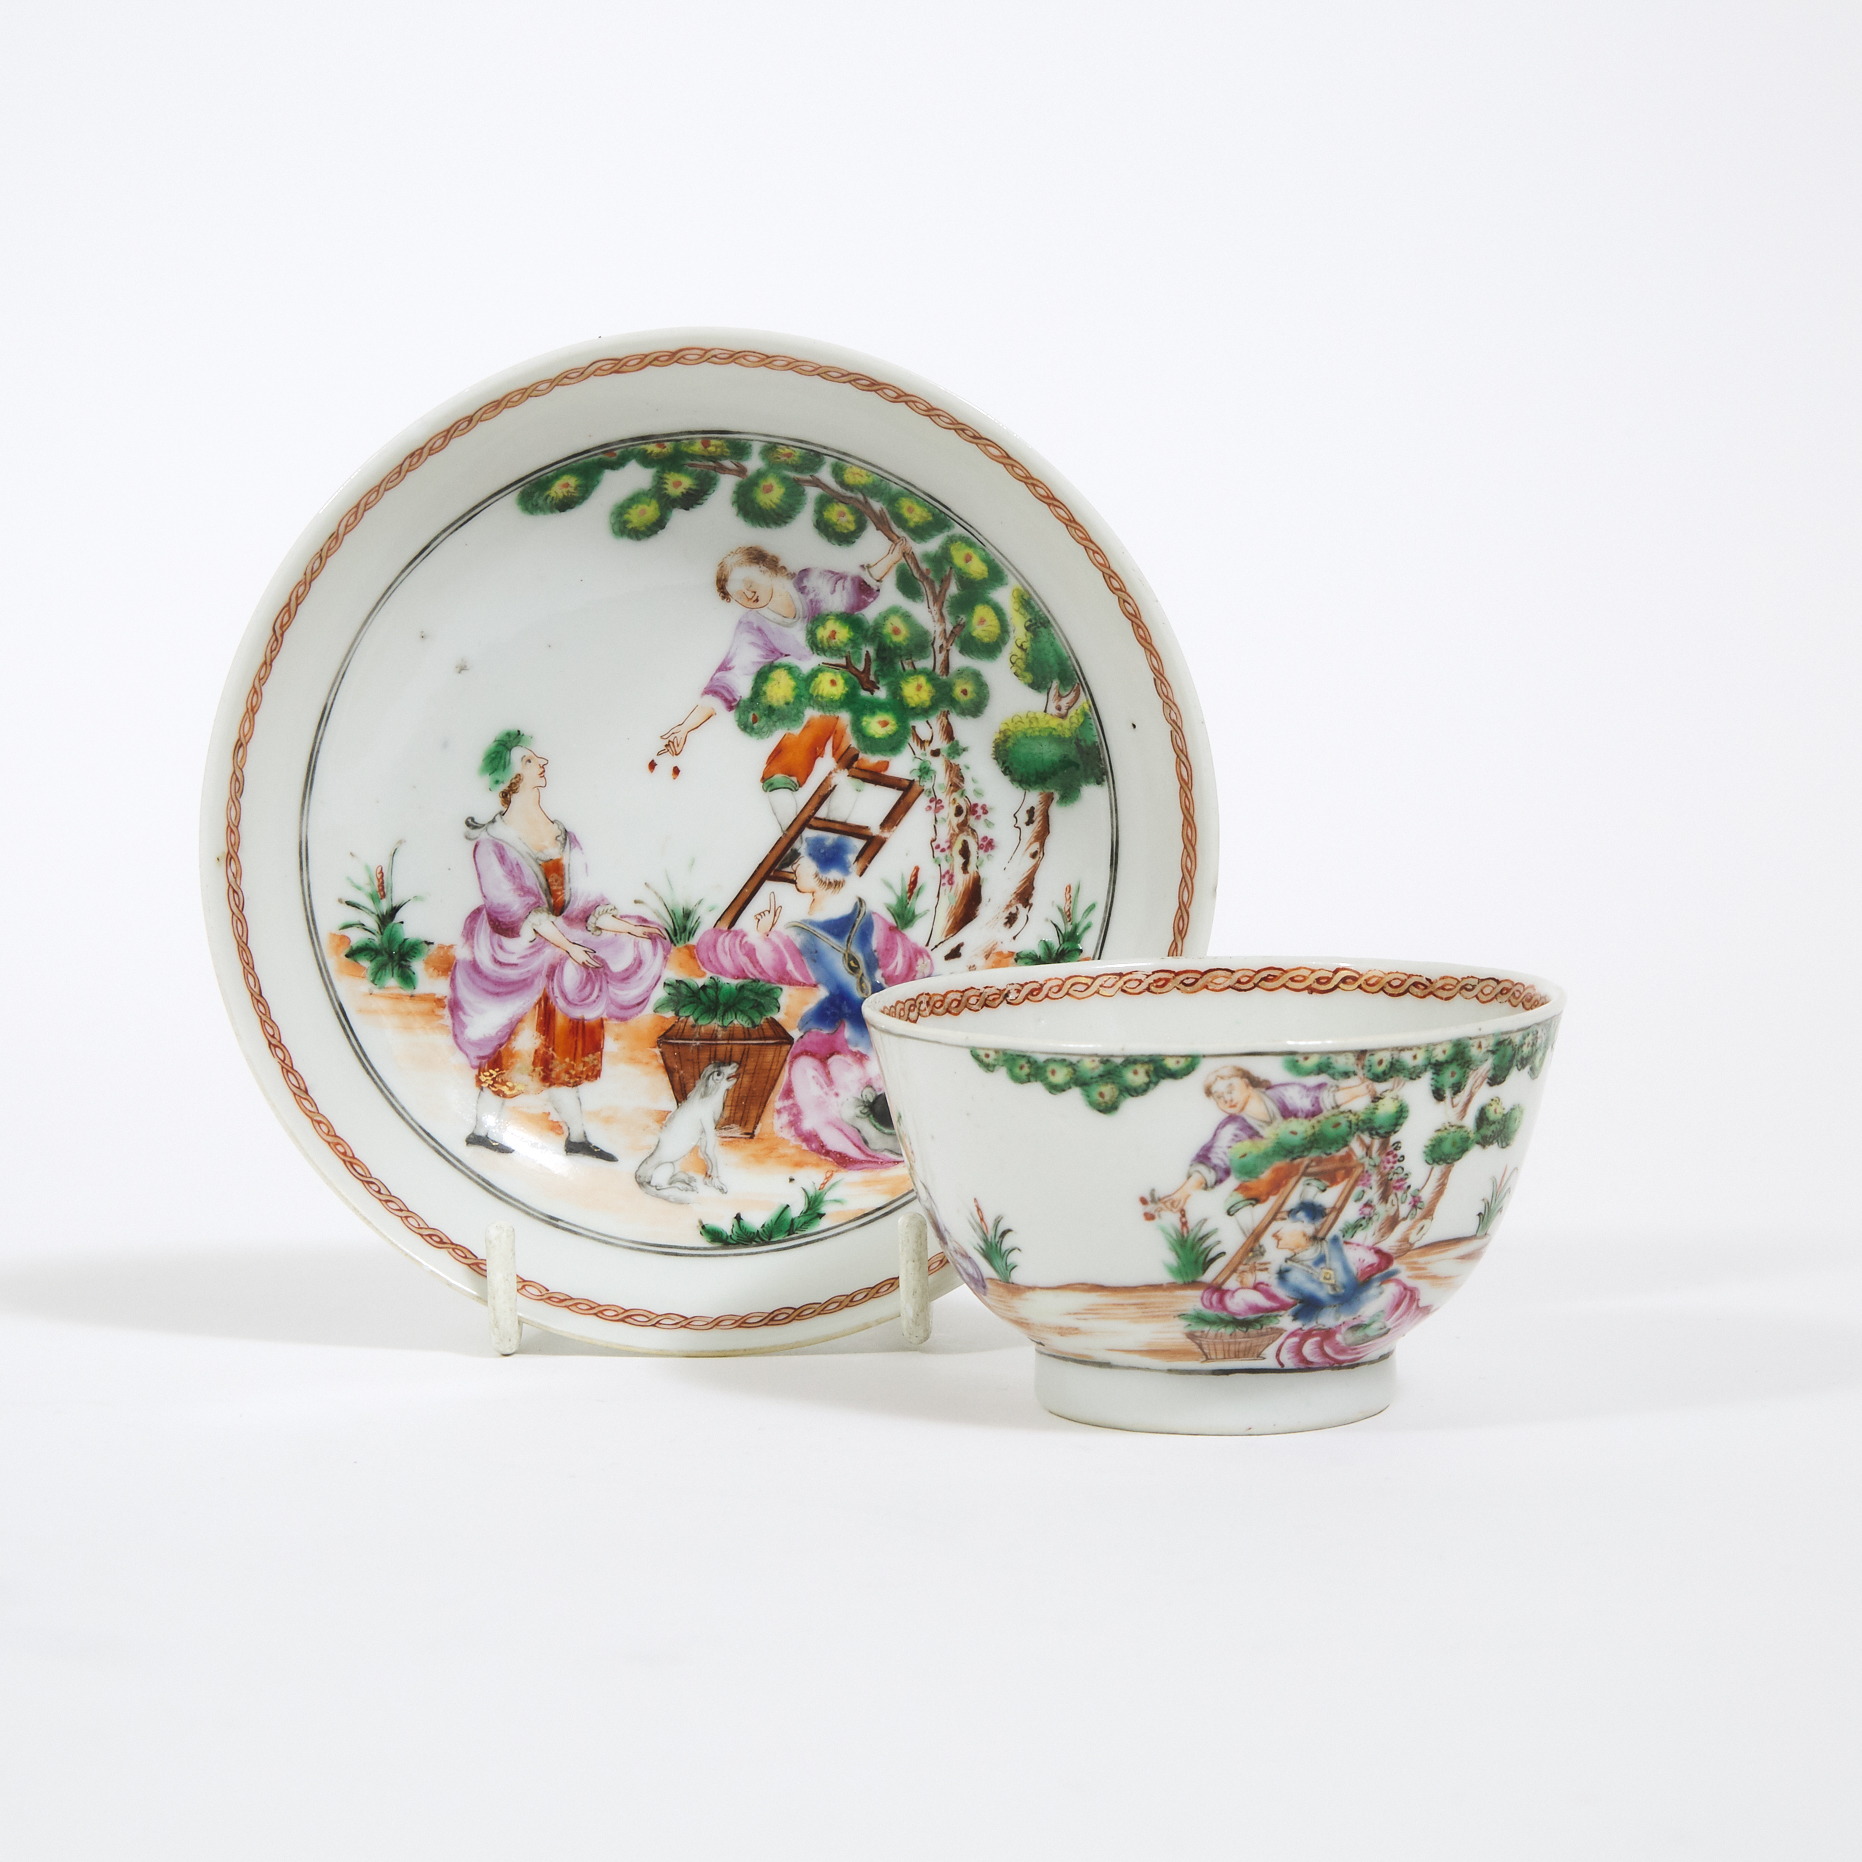 A Chinese Export 'European Subject' Cup and Saucer, Qianlong Period, 18th Century